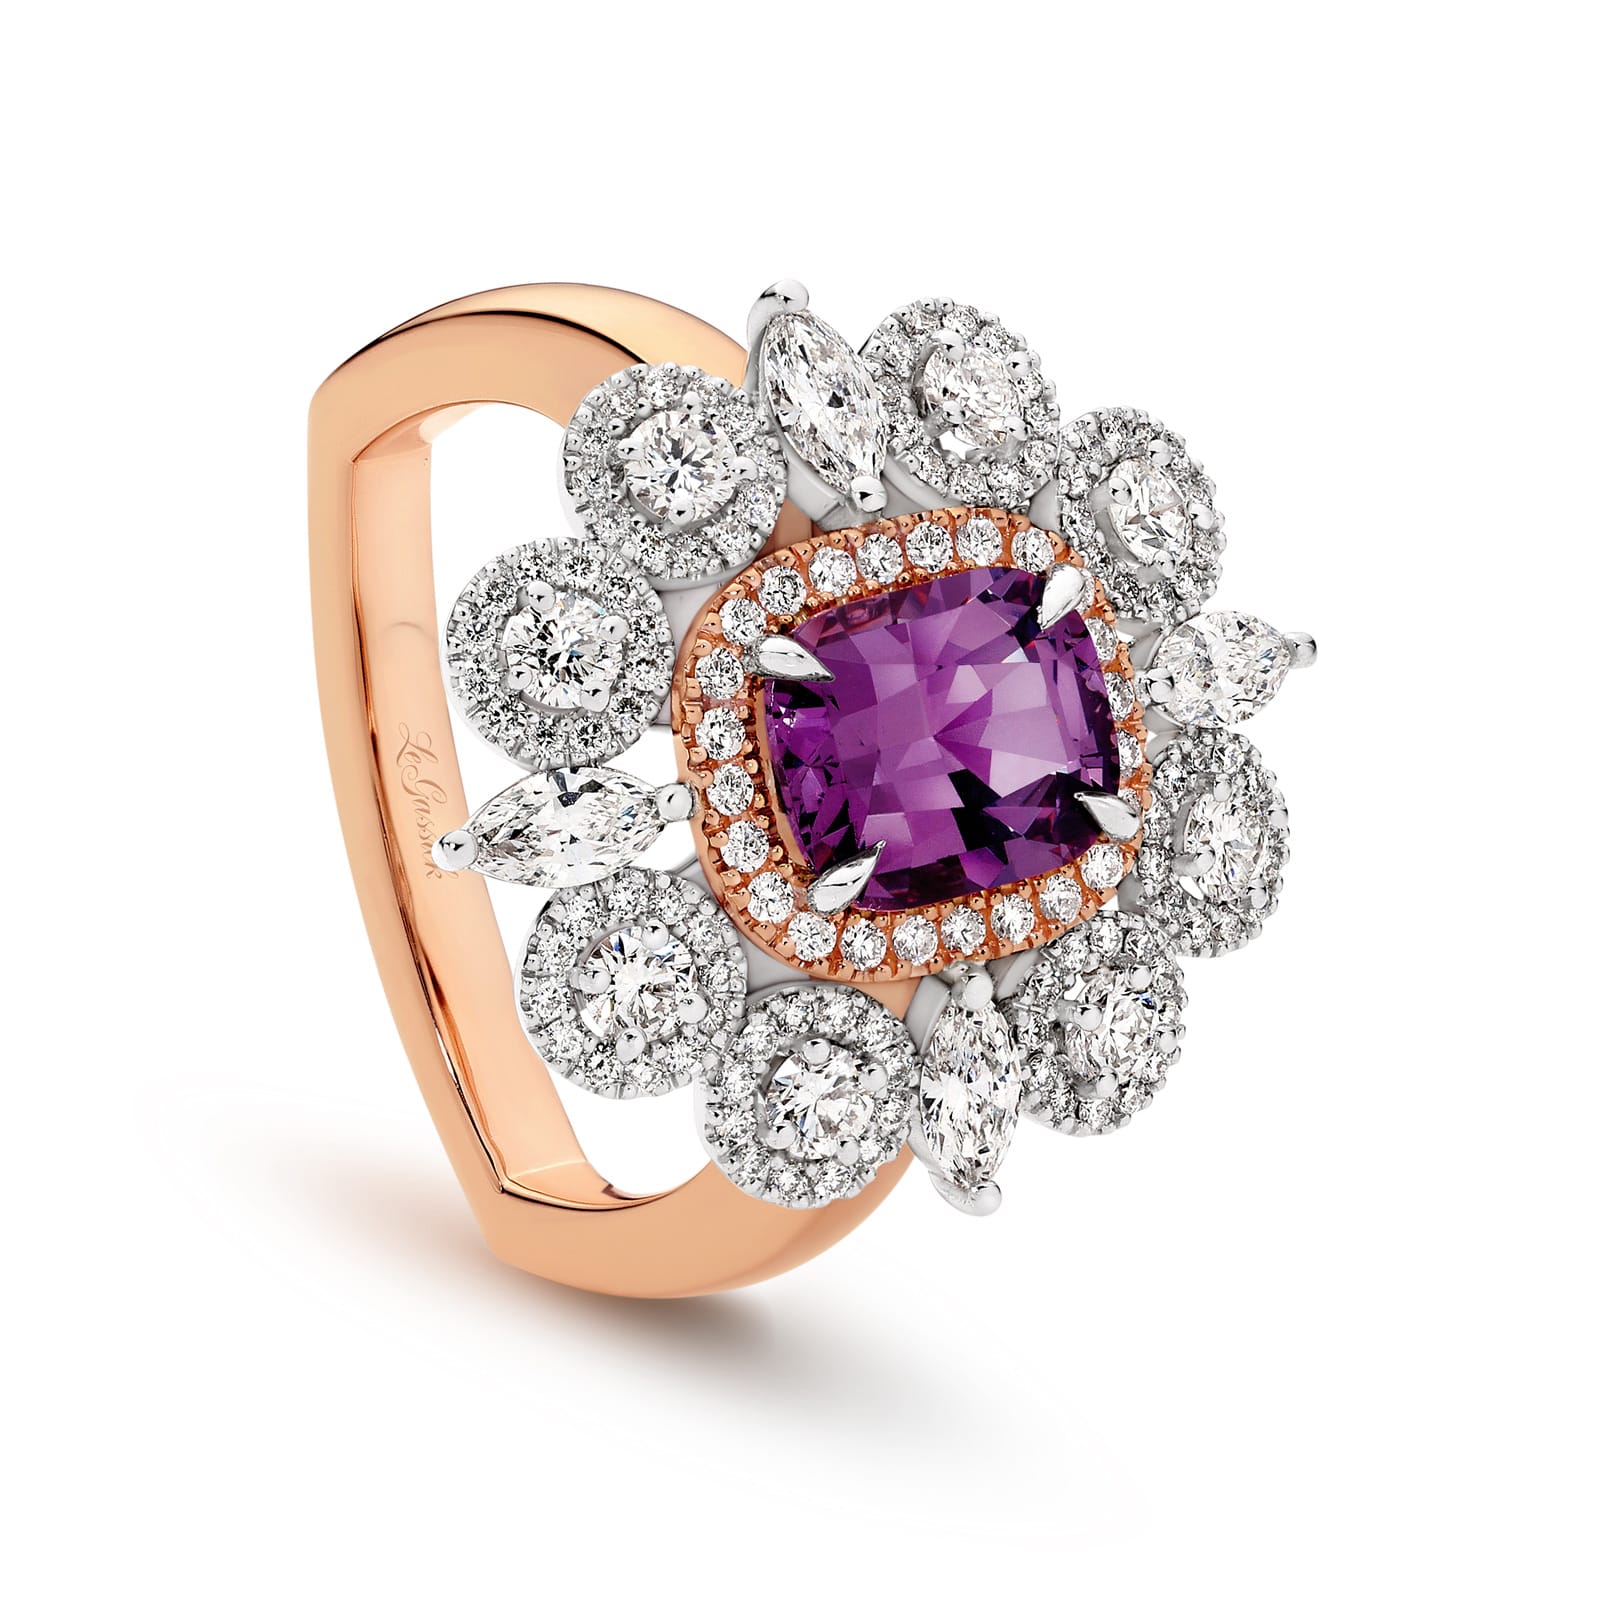 Eloise is a French-inspired 2.31 carat cushion-cut natural Lavender Spinel ring with four Marquise-shaped diamonds and 129 round brilliant cut diamonds. She was designed and handcrafted by LeGassick's Master Jewellers, Gold Coast, Australia.